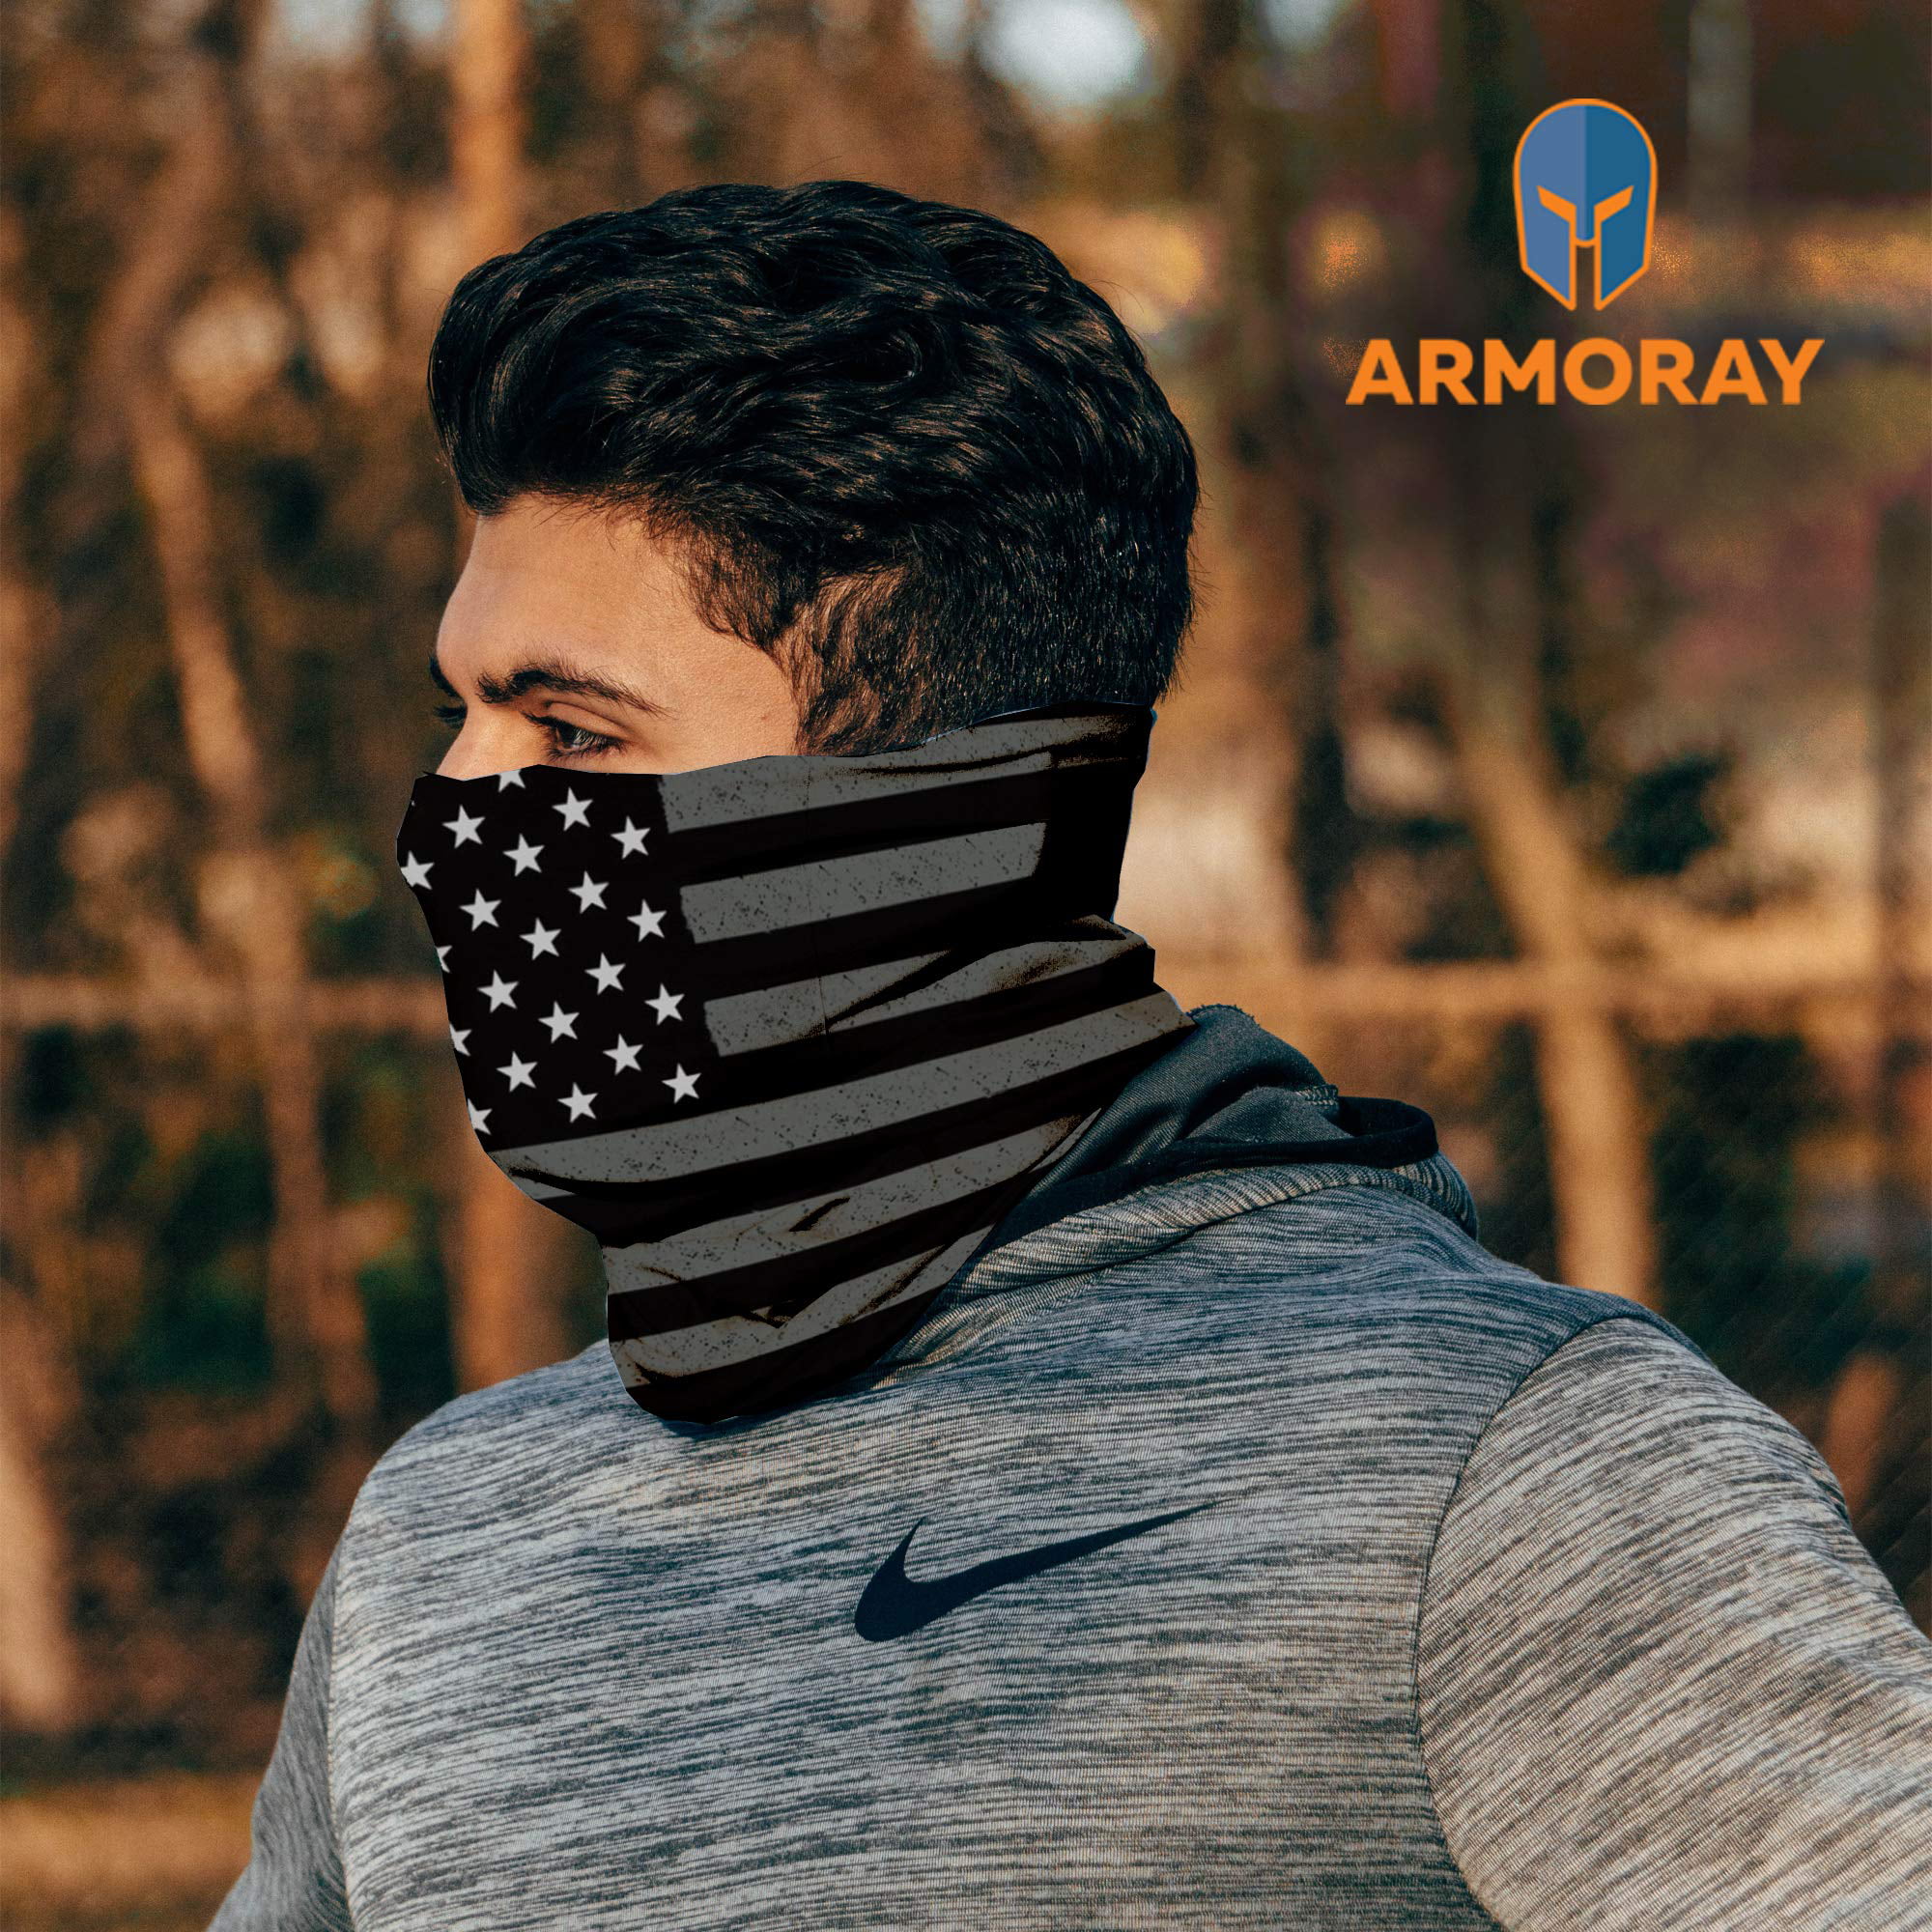 ARMORAY Neck Gaiter Face Mask - 4 Pack Reusable & Washable Cloth Face Cover,  Bandana, Shield & Scarf for UV, Sun & Dust Protection - Outdoor Head Wrap  for Fishing, Motorcycle Riding (BW USA 4 Pack) 